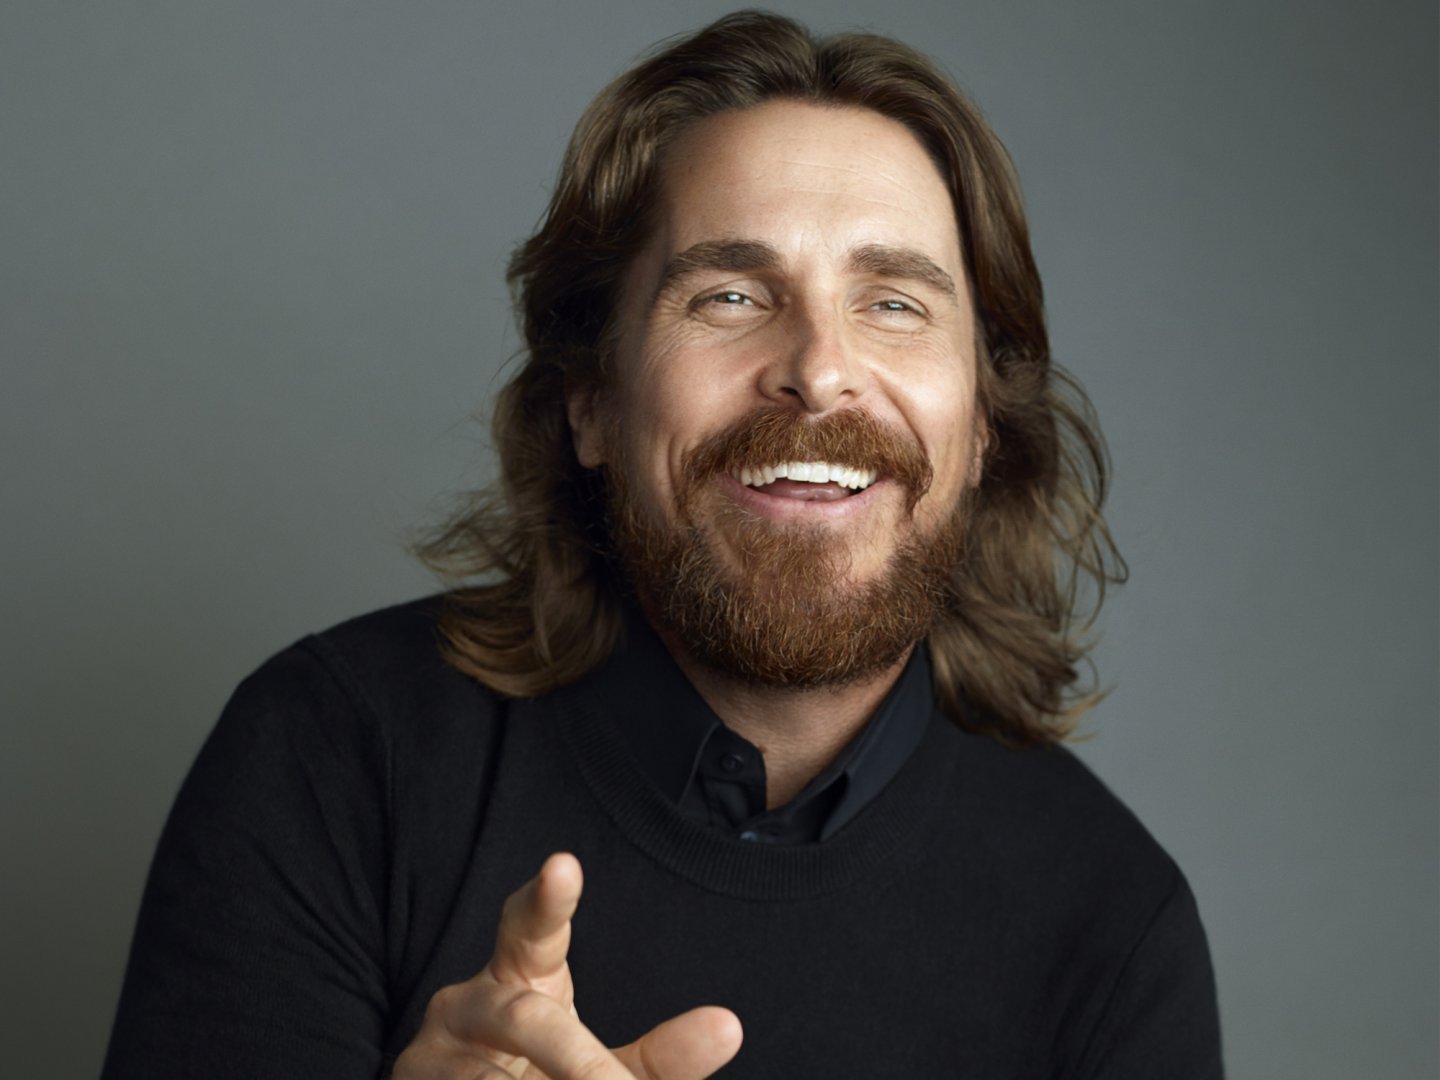 Christian Bale Is Esquire's January Cover Star